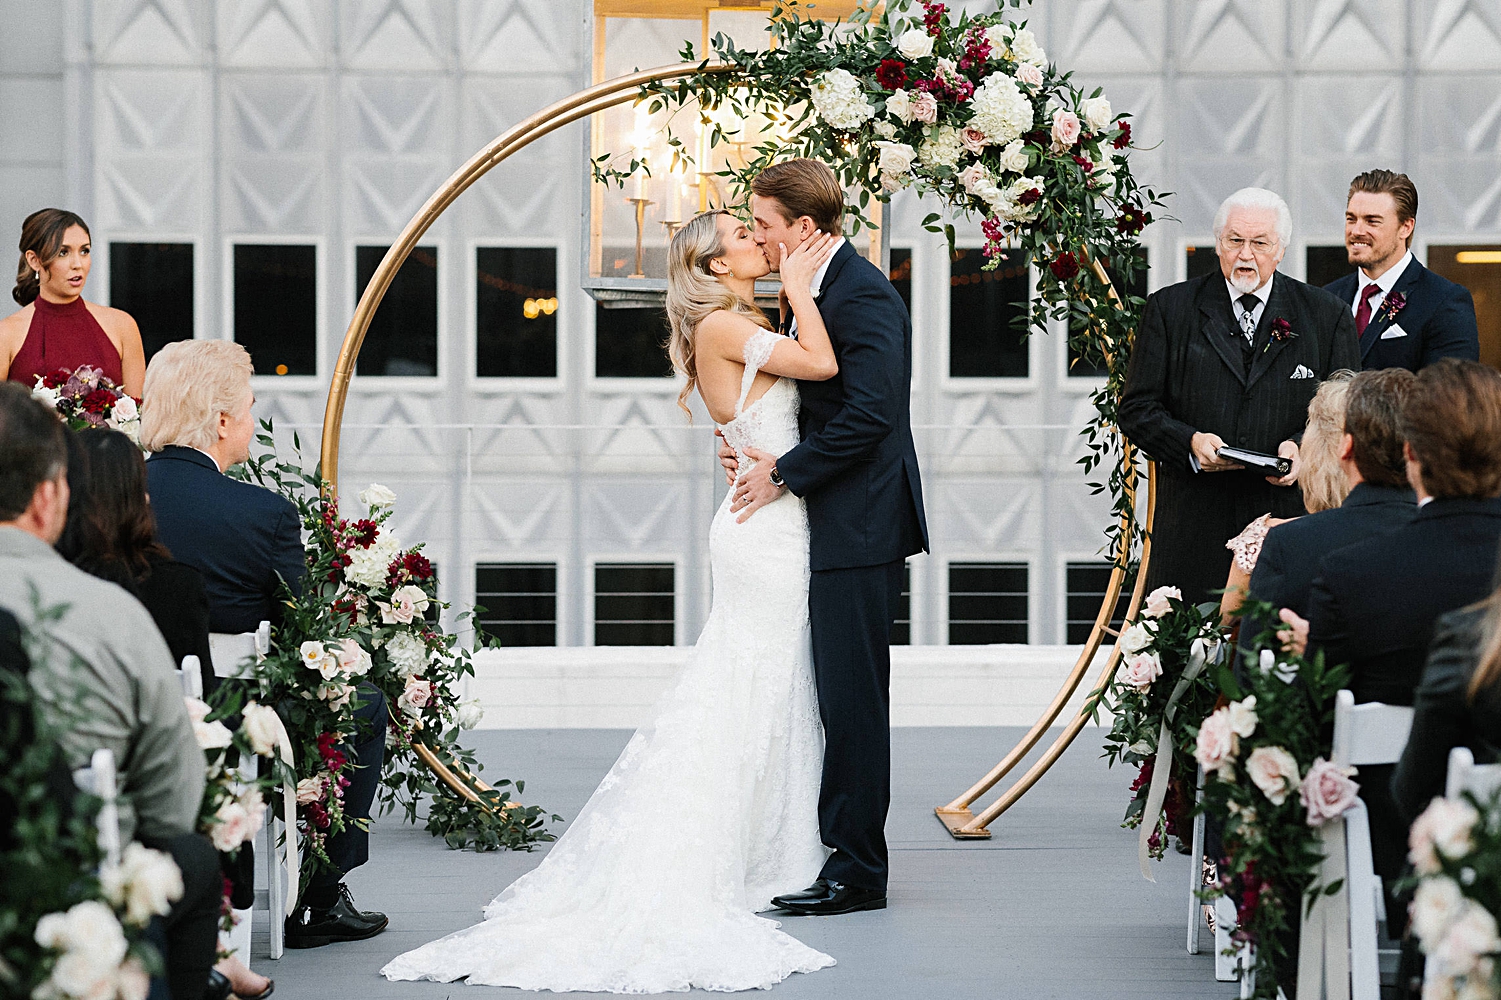 bride and groom first kiss at rooftop wedding ceremony floral arch altar 400 North Ervay Dallas Venue 